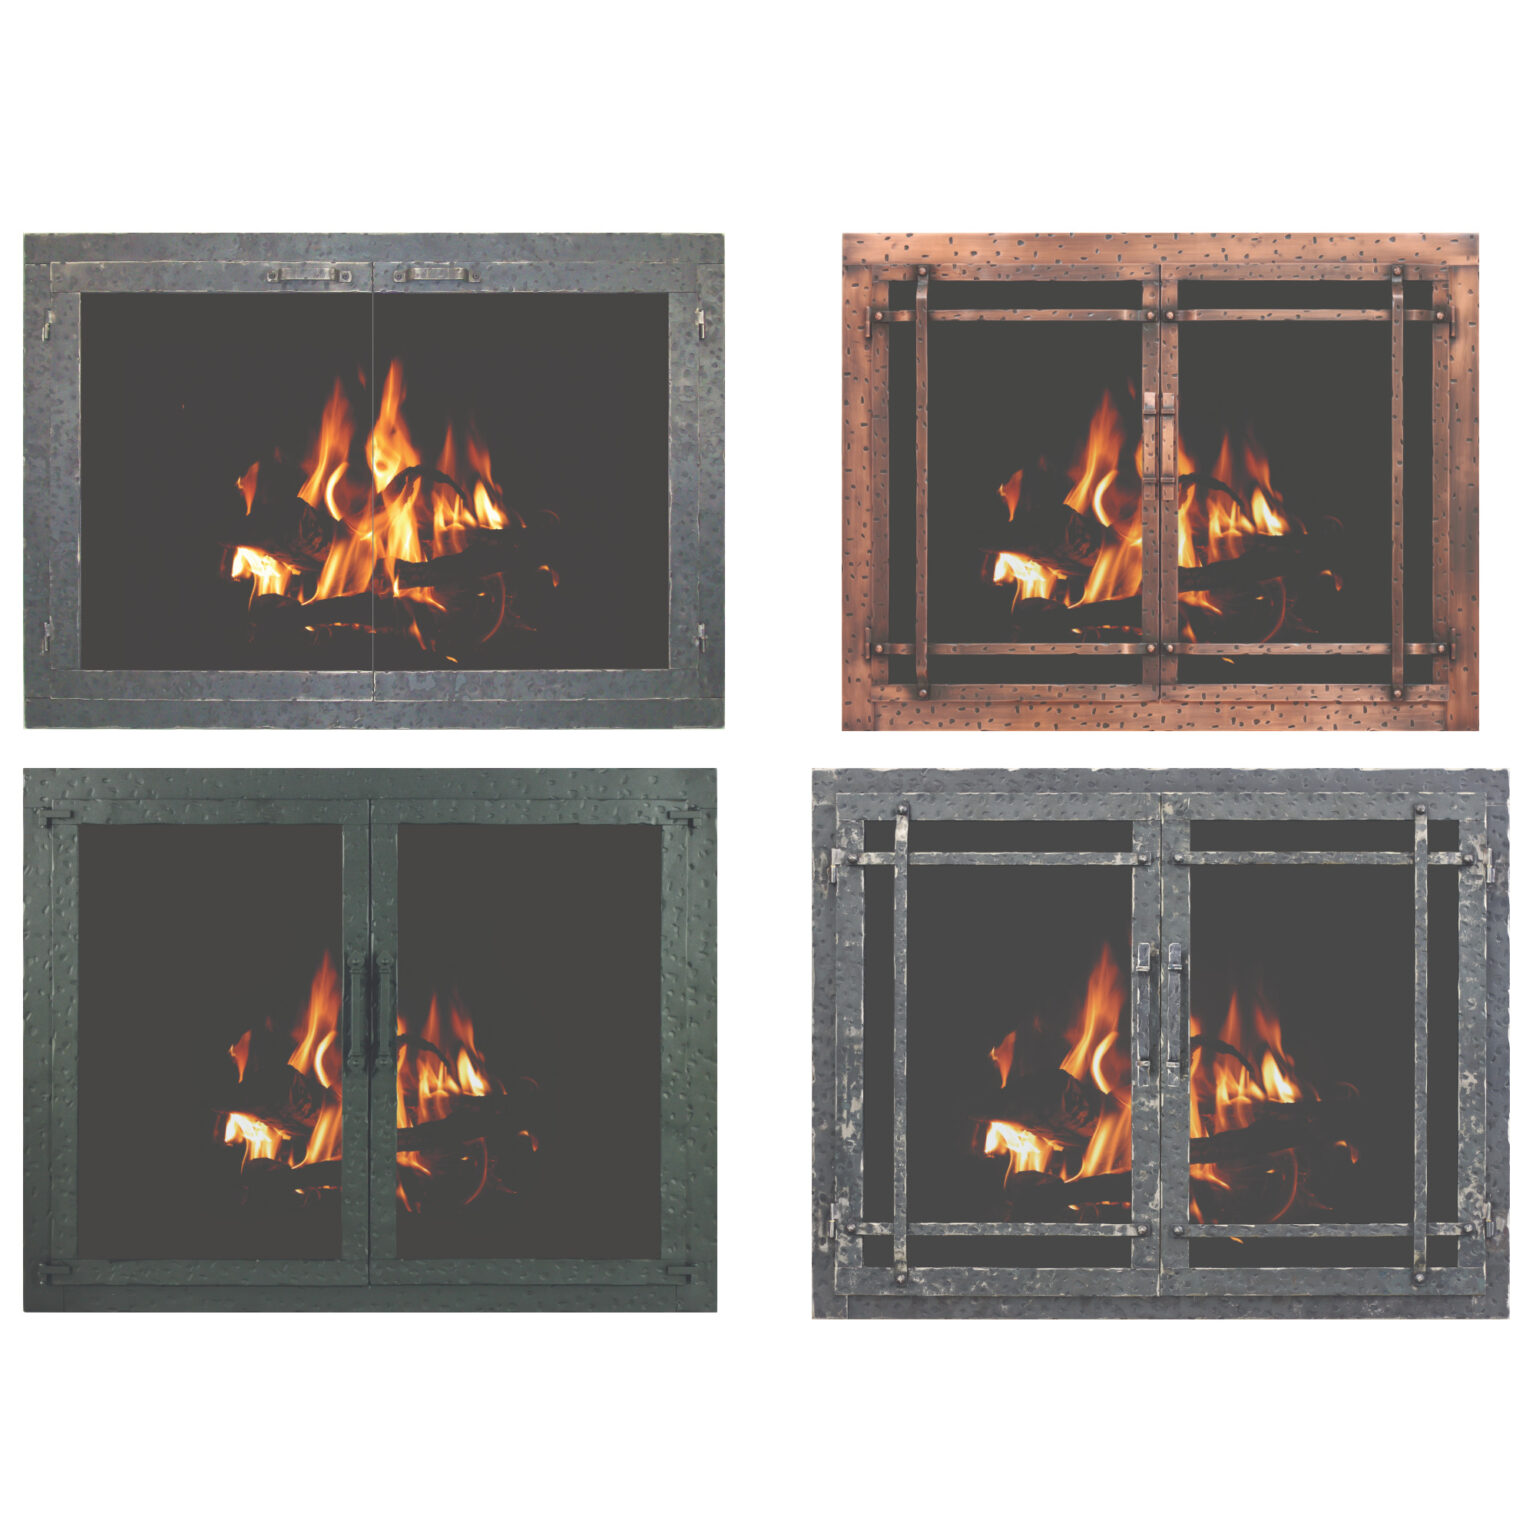 Stoll Craftsman Collection Aged Iron Fireplace Doors.jpg